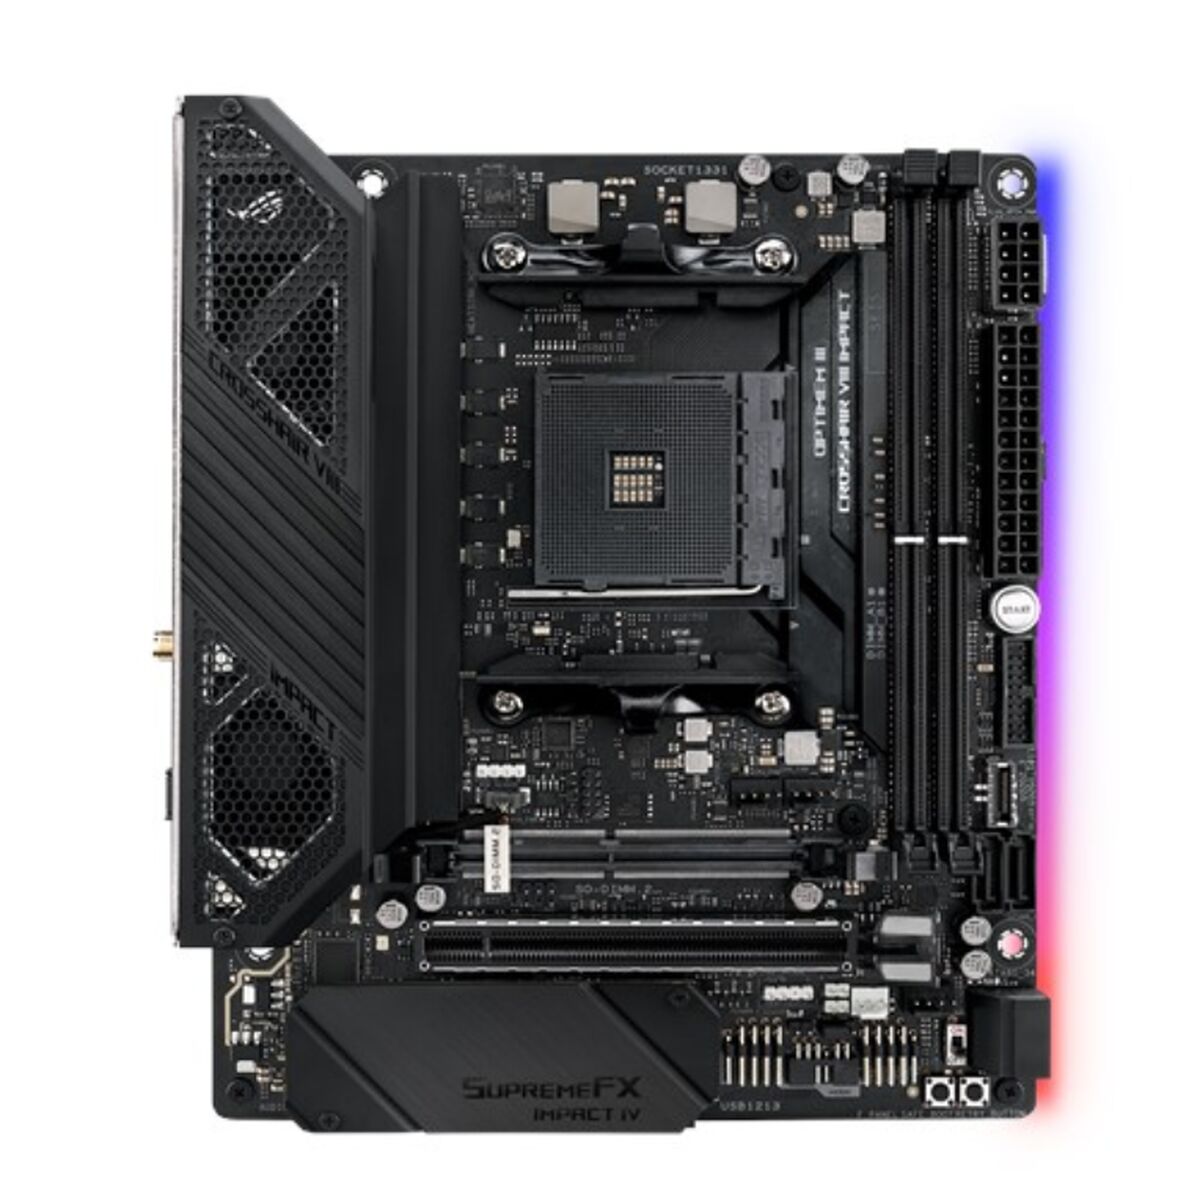 Motherboard Asus ROG CROSSHAIR VIII IMPACT X570 AMD AM4 AMD X570 AMD, Asus, Computing, Components, motherboard-asus-rog-crosshair-viii-impact-x570-amd-am4-amd-x570-amd, Brand_Asus, category-reference-2609, category-reference-2803, category-reference-2804, category-reference-t-19685, category-reference-t-19912, category-reference-t-21360, category-reference-t-25660, computers / components, Condition_NEW, Price_400 - 500, Teleworking, RiotNook